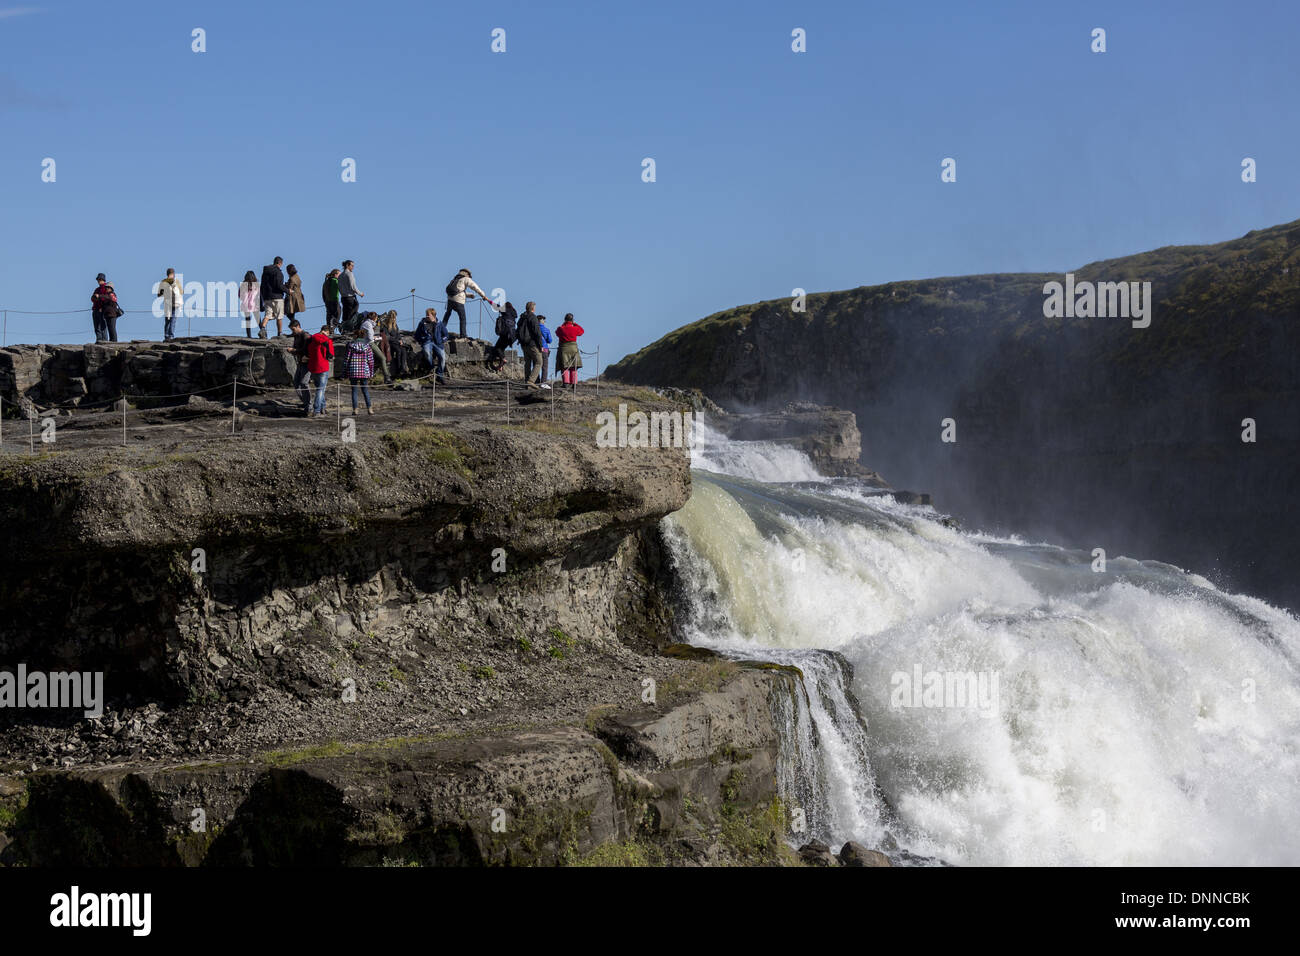 Tourists overlooking massive waterfall of Gullfoss (meaning the'Golden Falls') Iceland Stock Photo